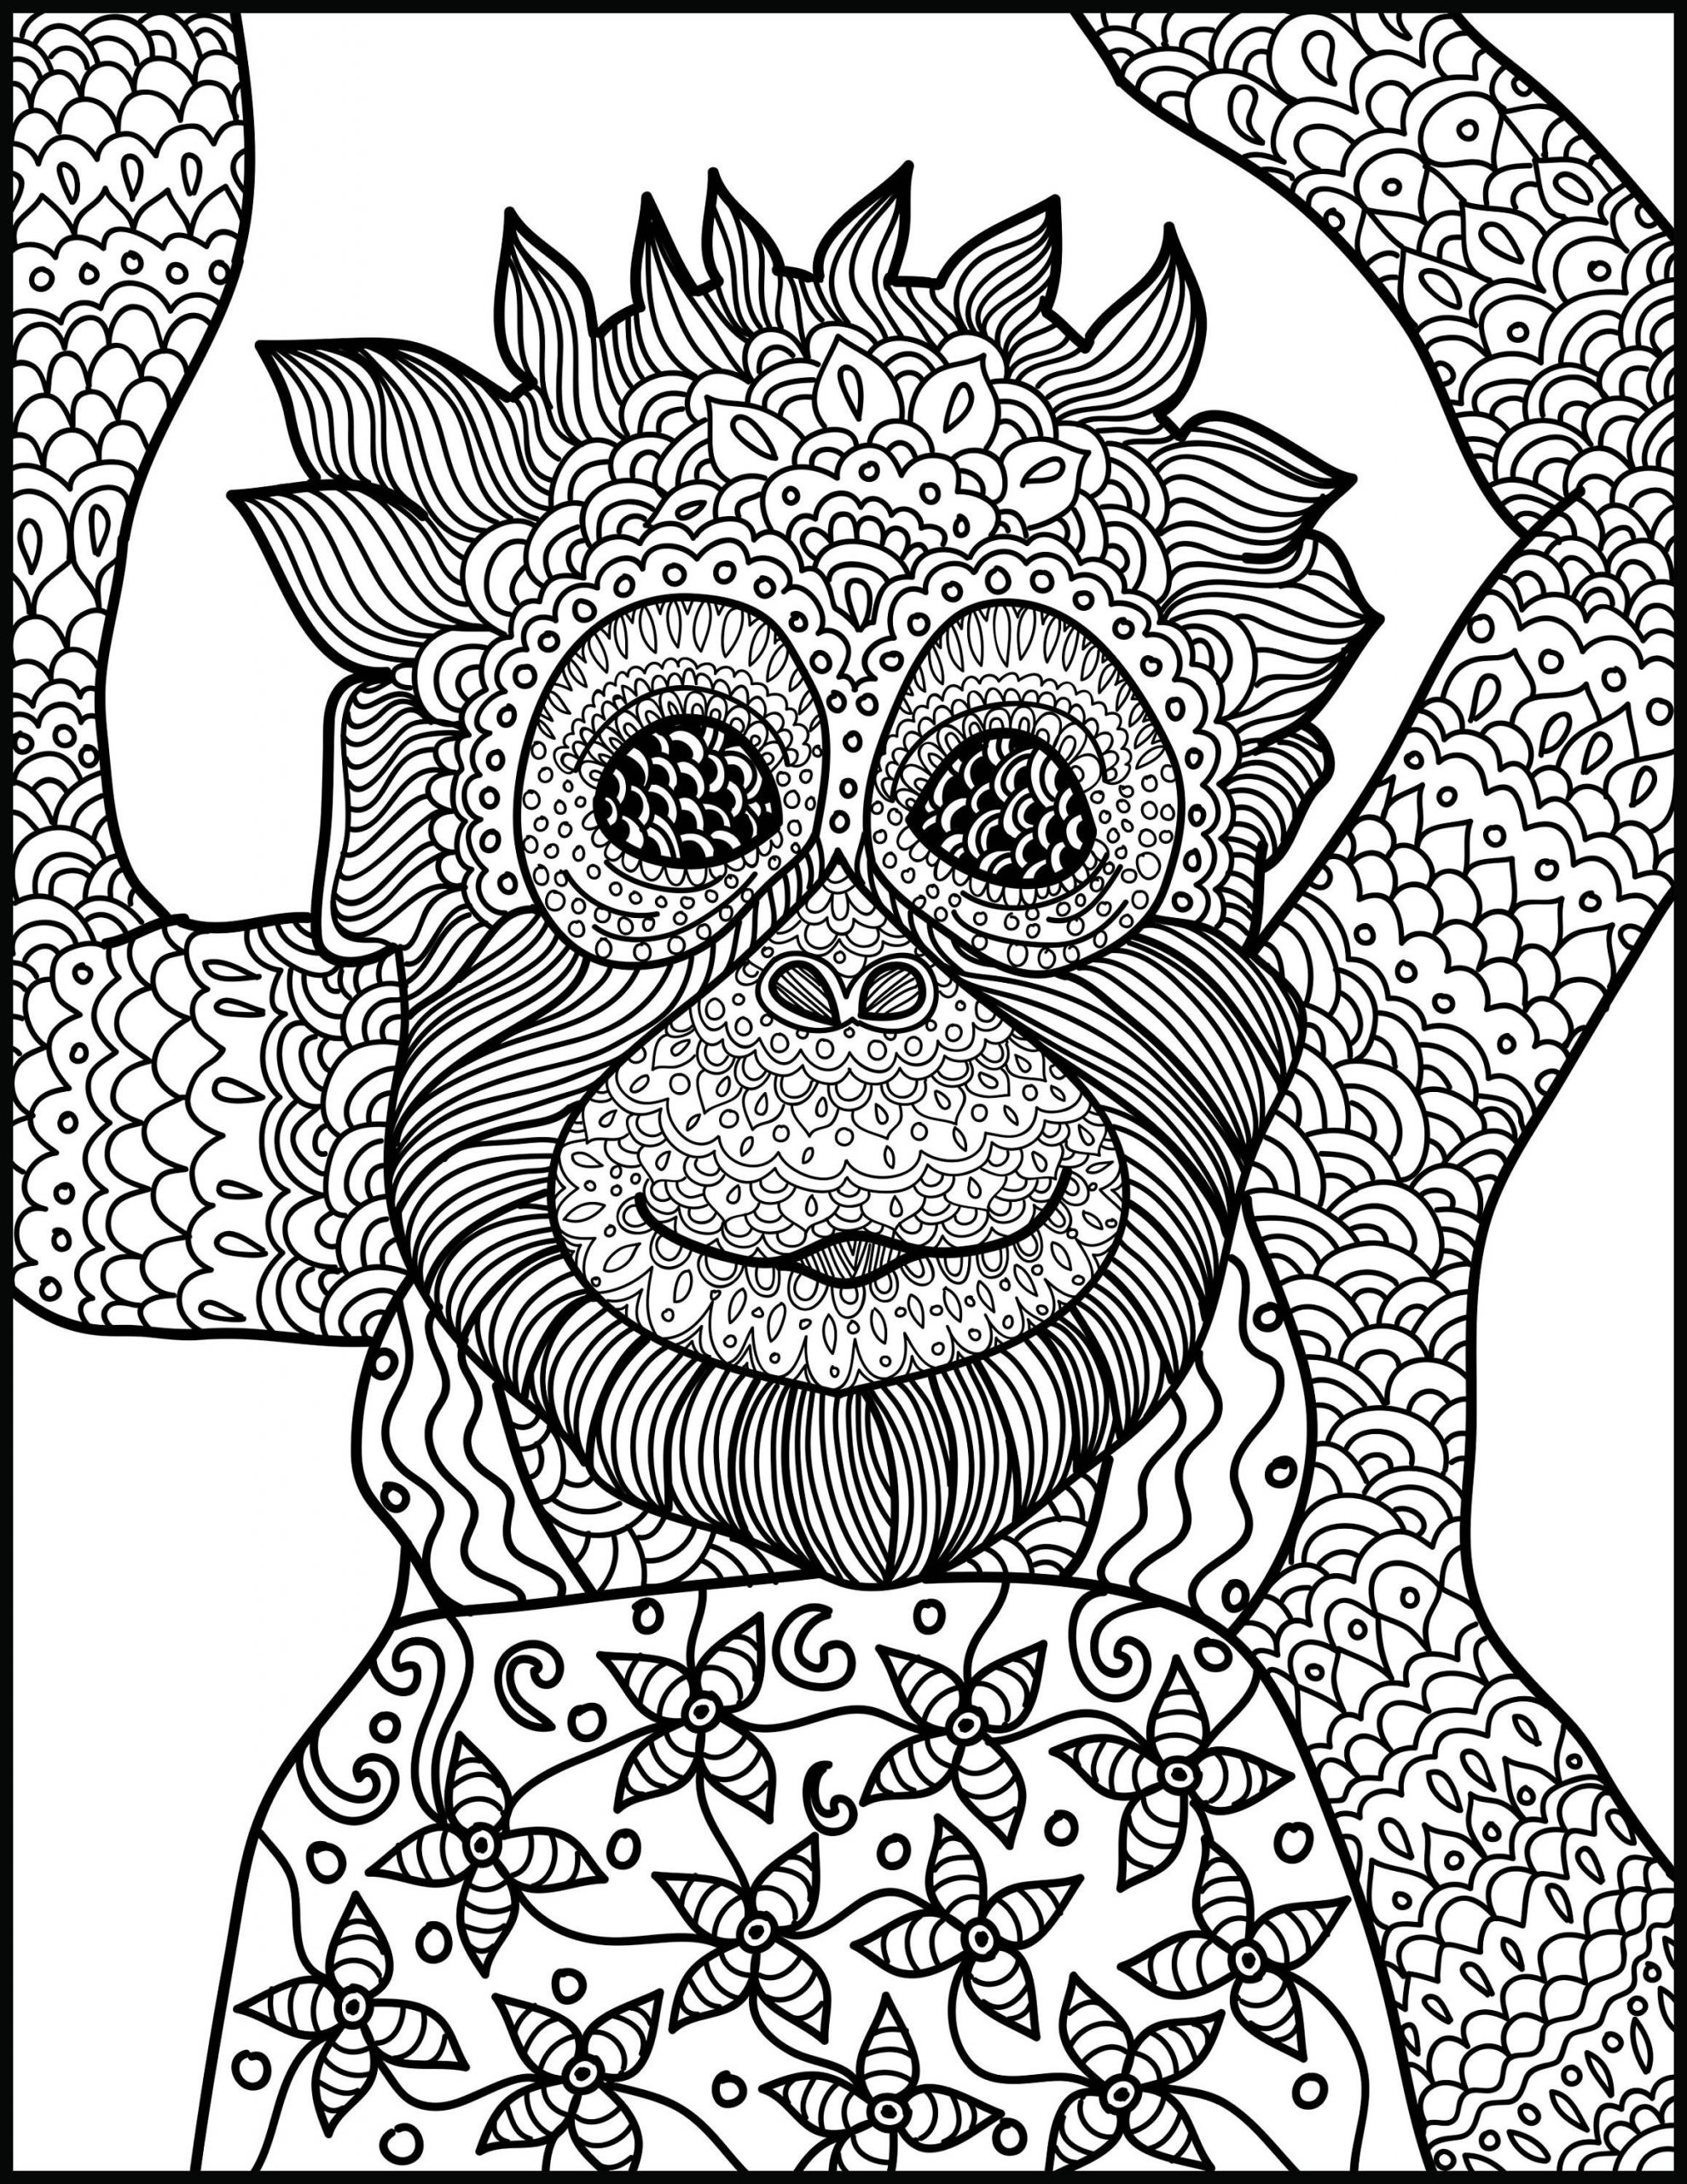 Animals Coloring Pages For Adults
 Animal Coloring Page Monkey Printable Adult Coloring Page